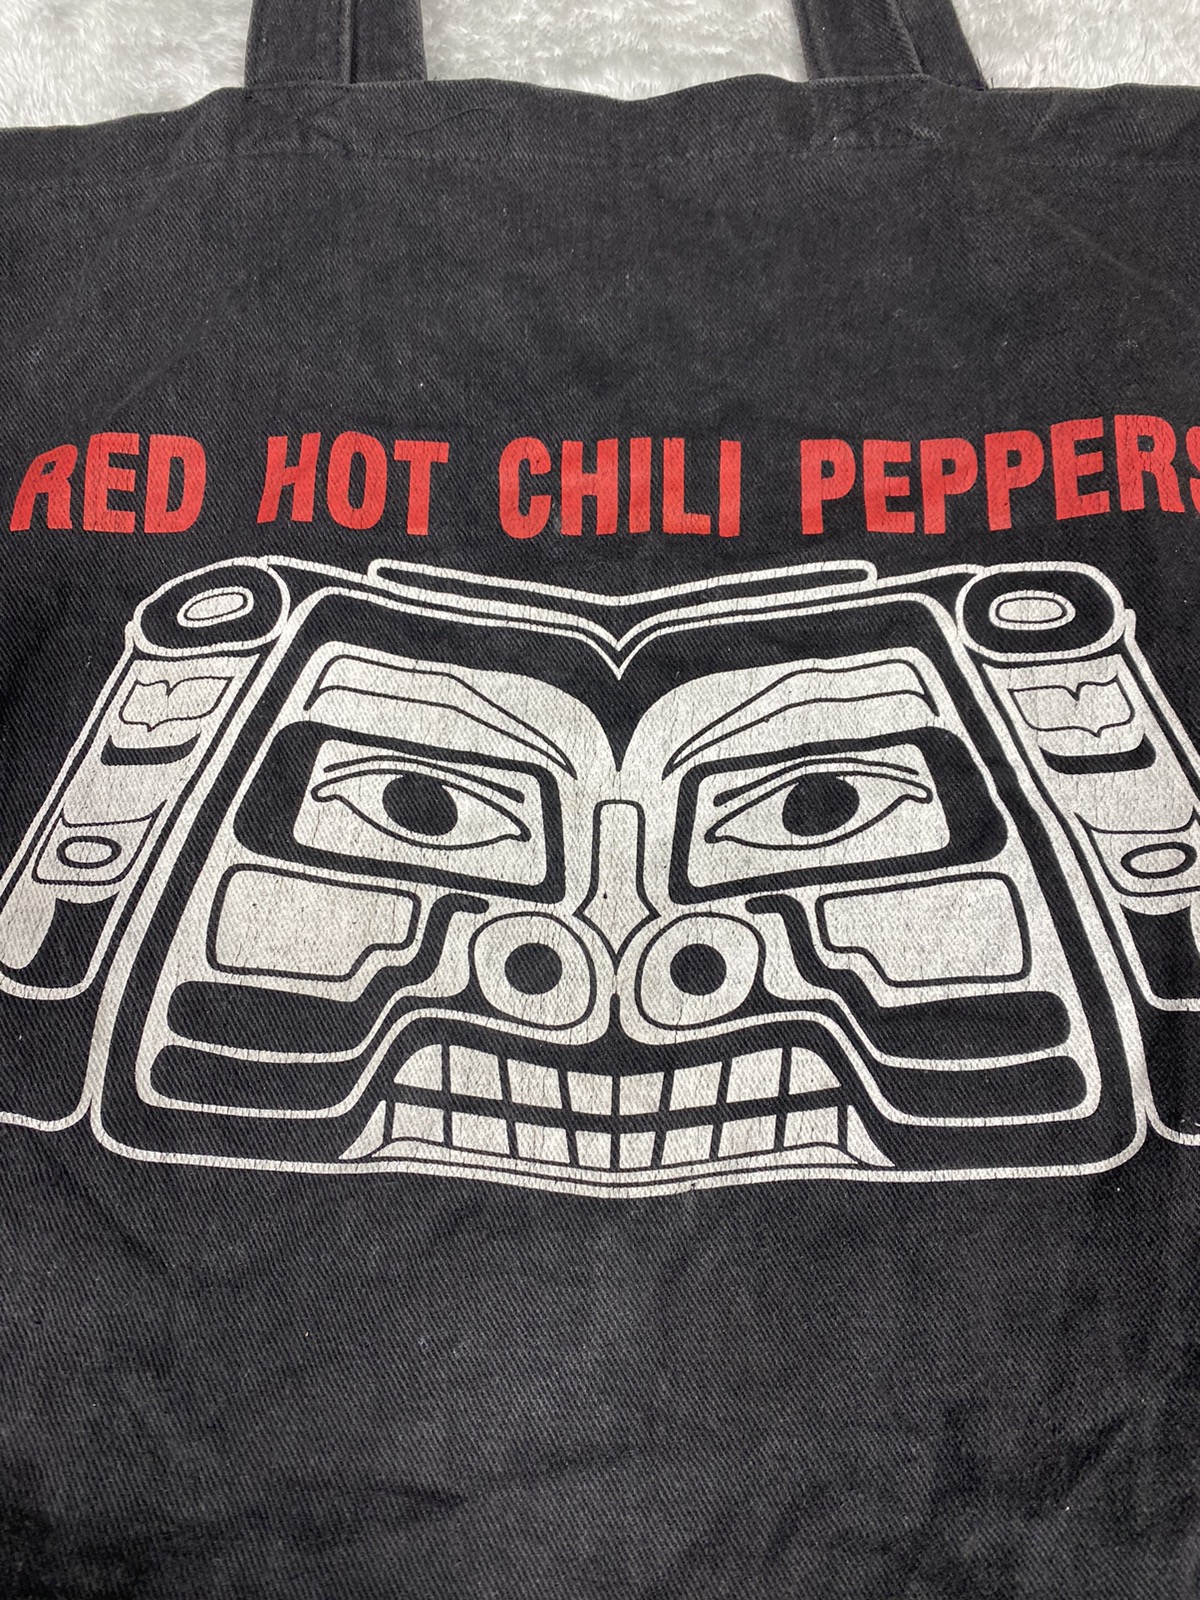 Vintage - Vintage Bootleg Red Hot Chili Peppers - 7